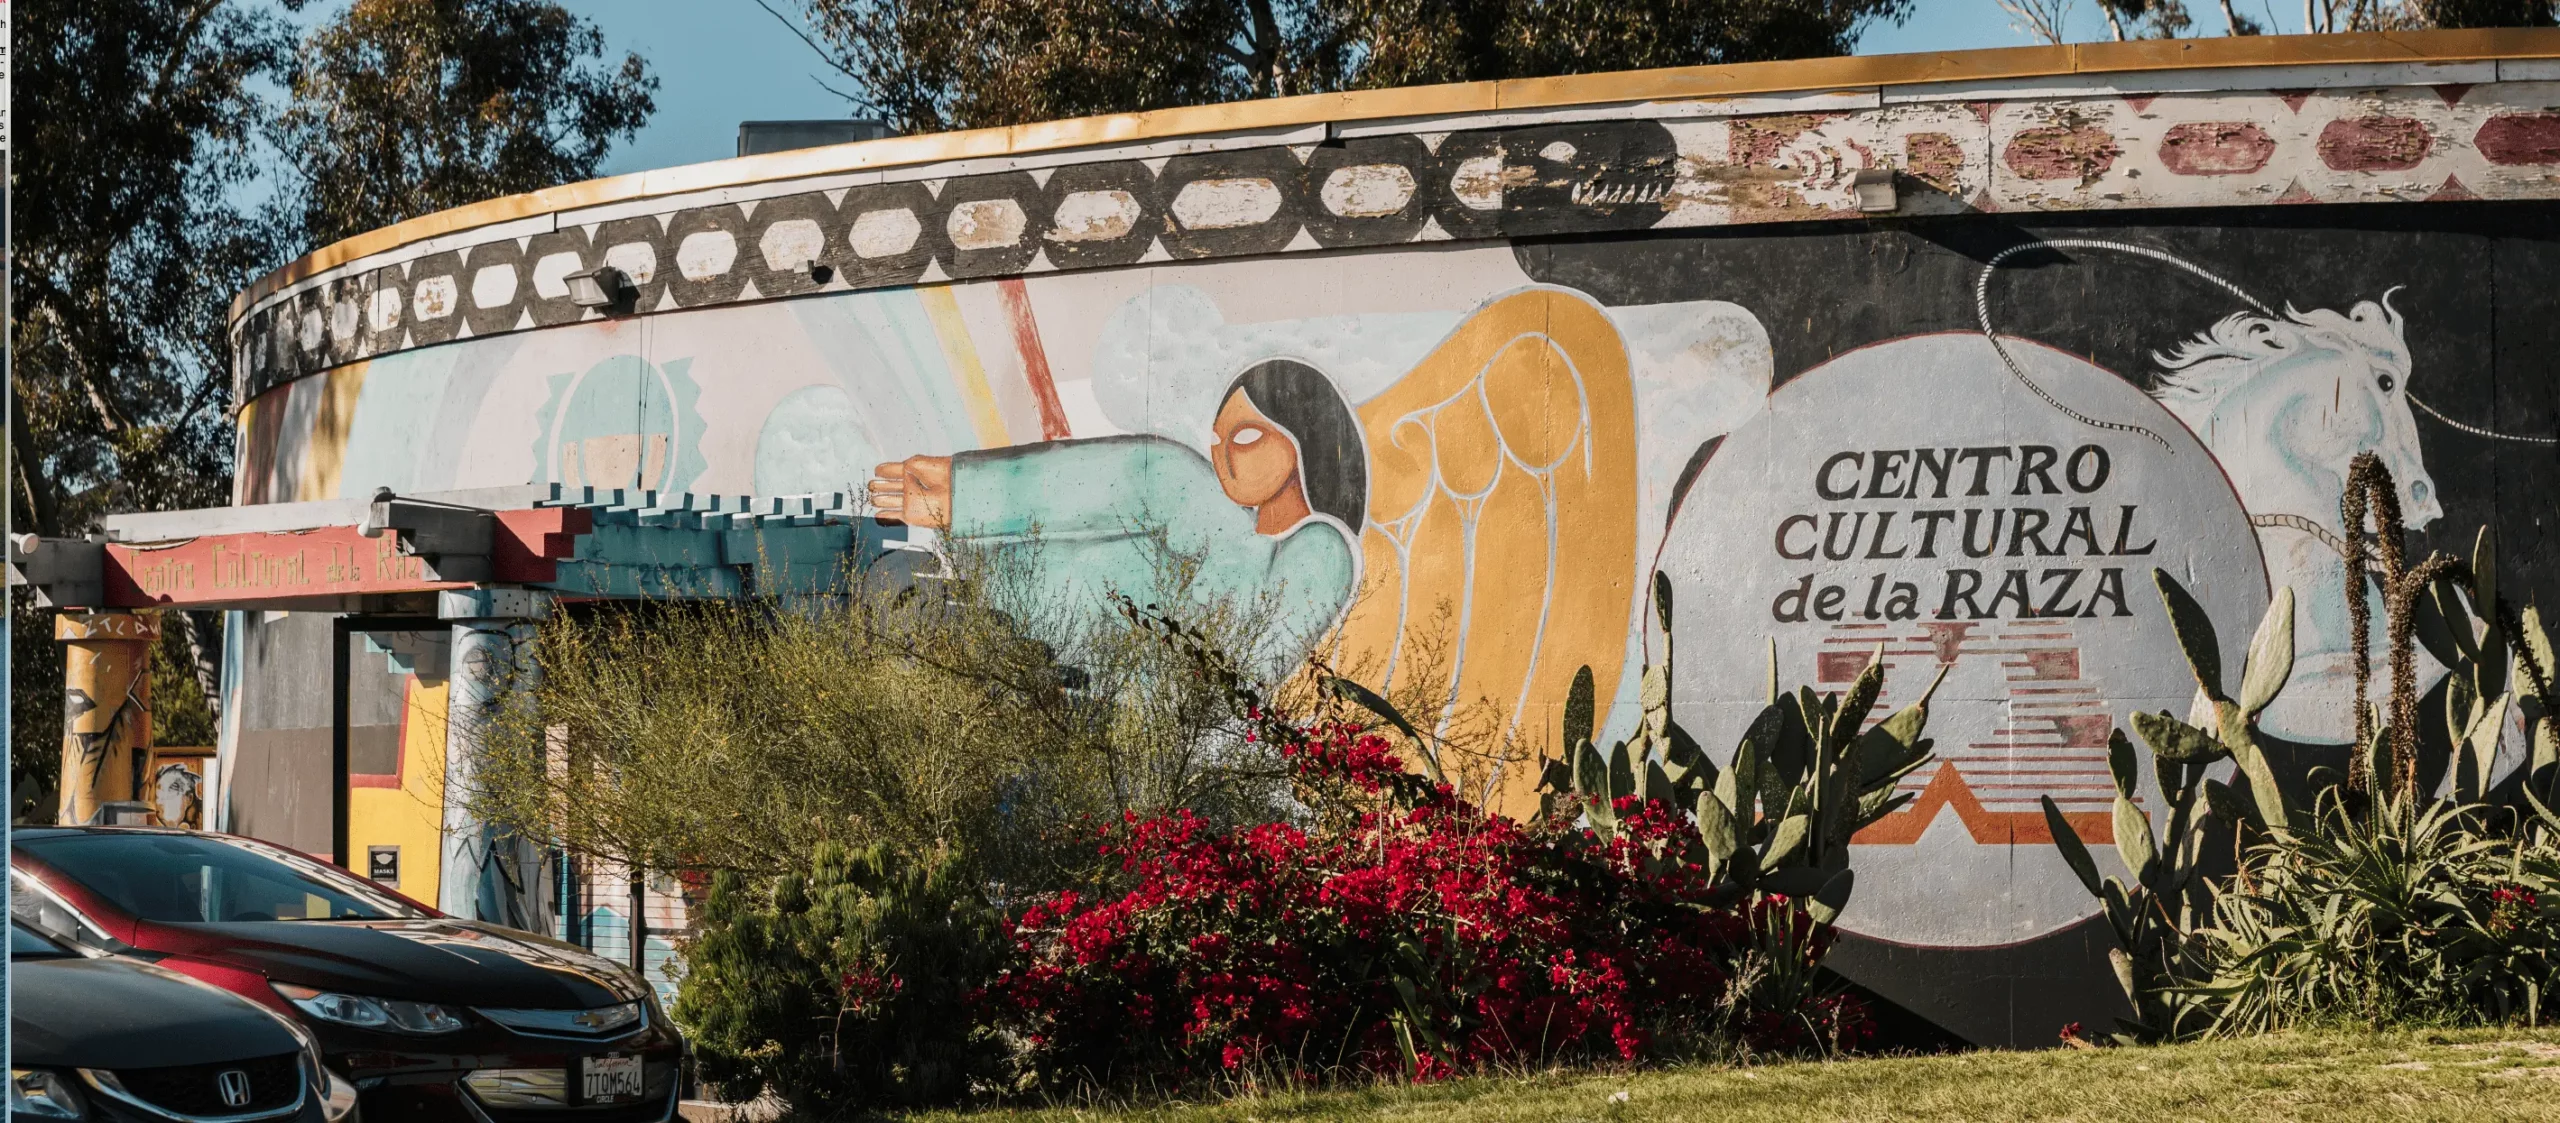 Centro Cultural del la Raza building with colorful murals depicting people and animals.